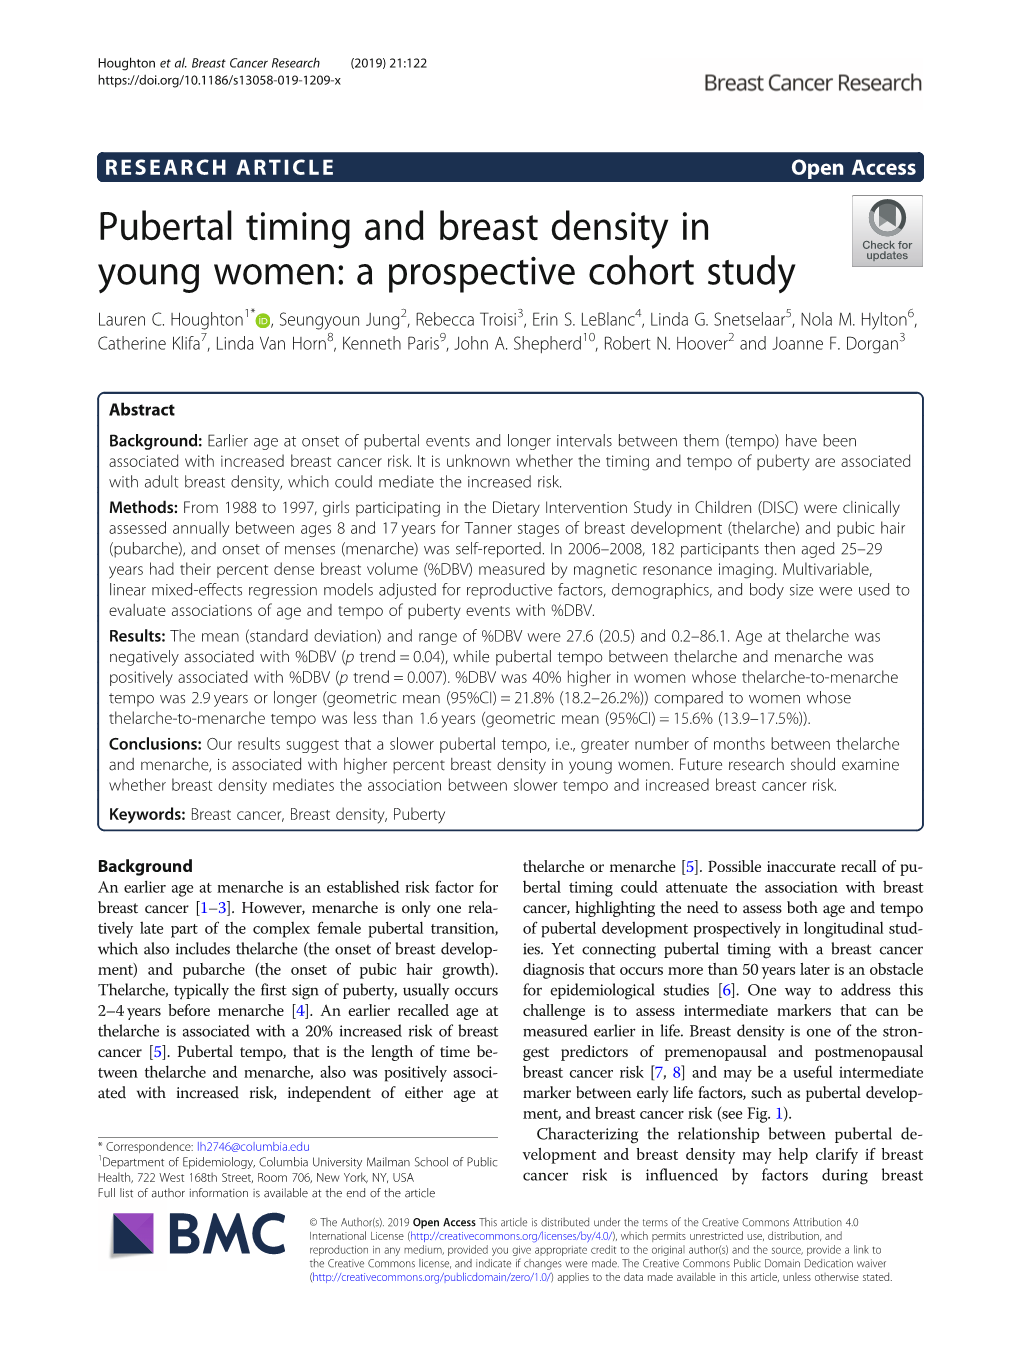 Pubertal Timing and Breast Density in Young Women: a Prospective Cohort Study Lauren C